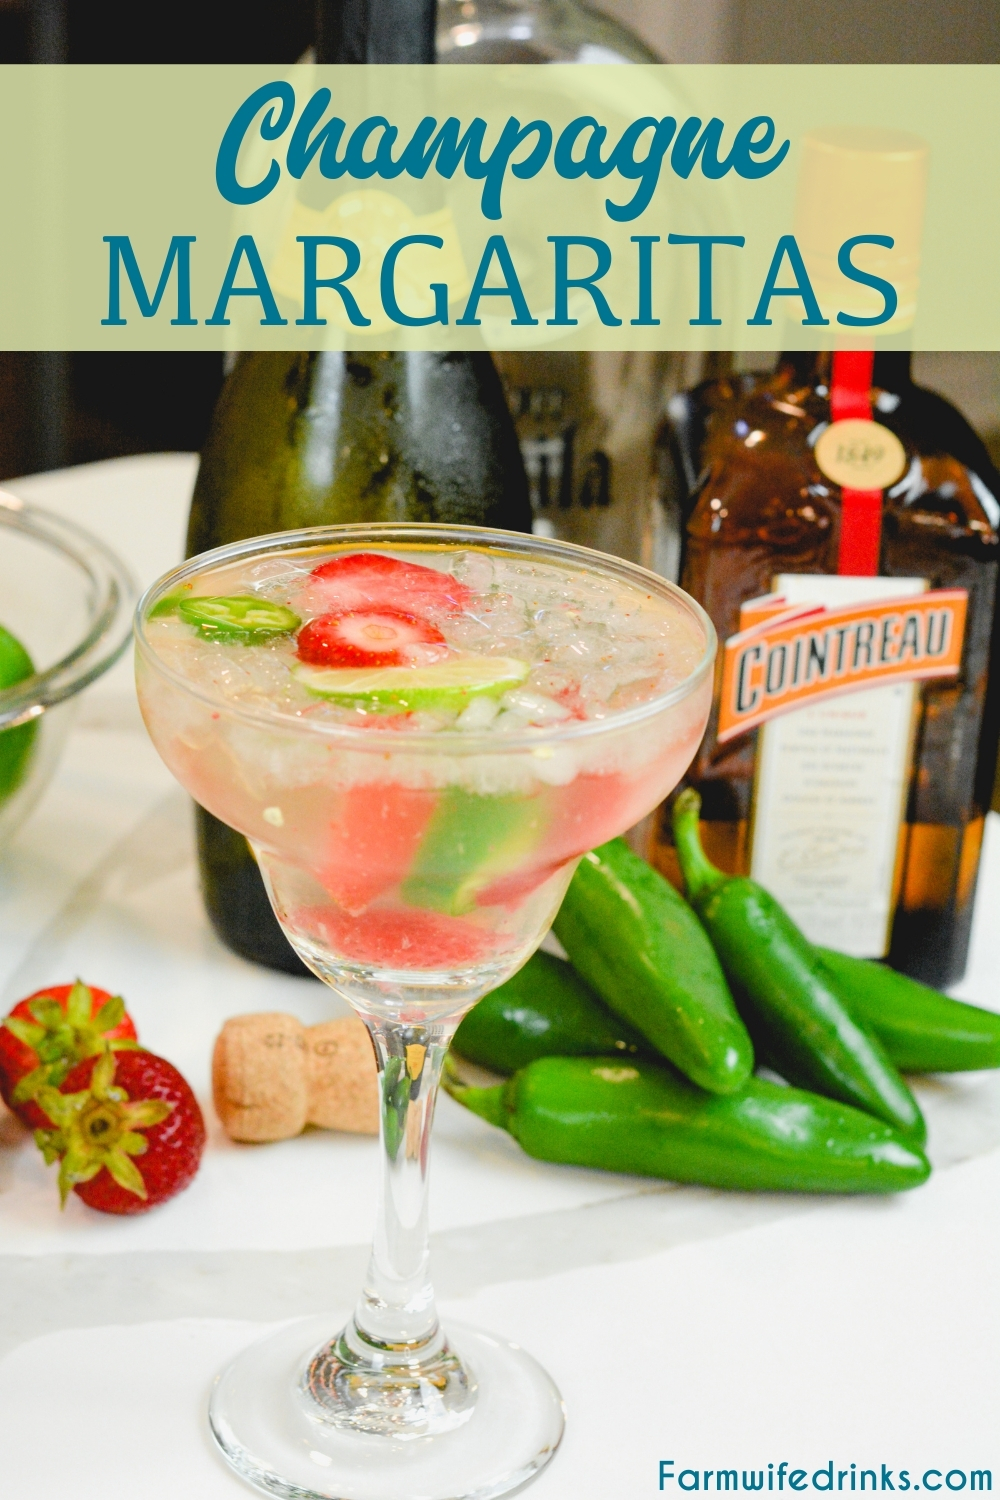 Champagne margaritas are sweet and spicy with the combination of a bottle of bubbly, sugared strawberries, Cointreau, lime juice, and jalapenos.